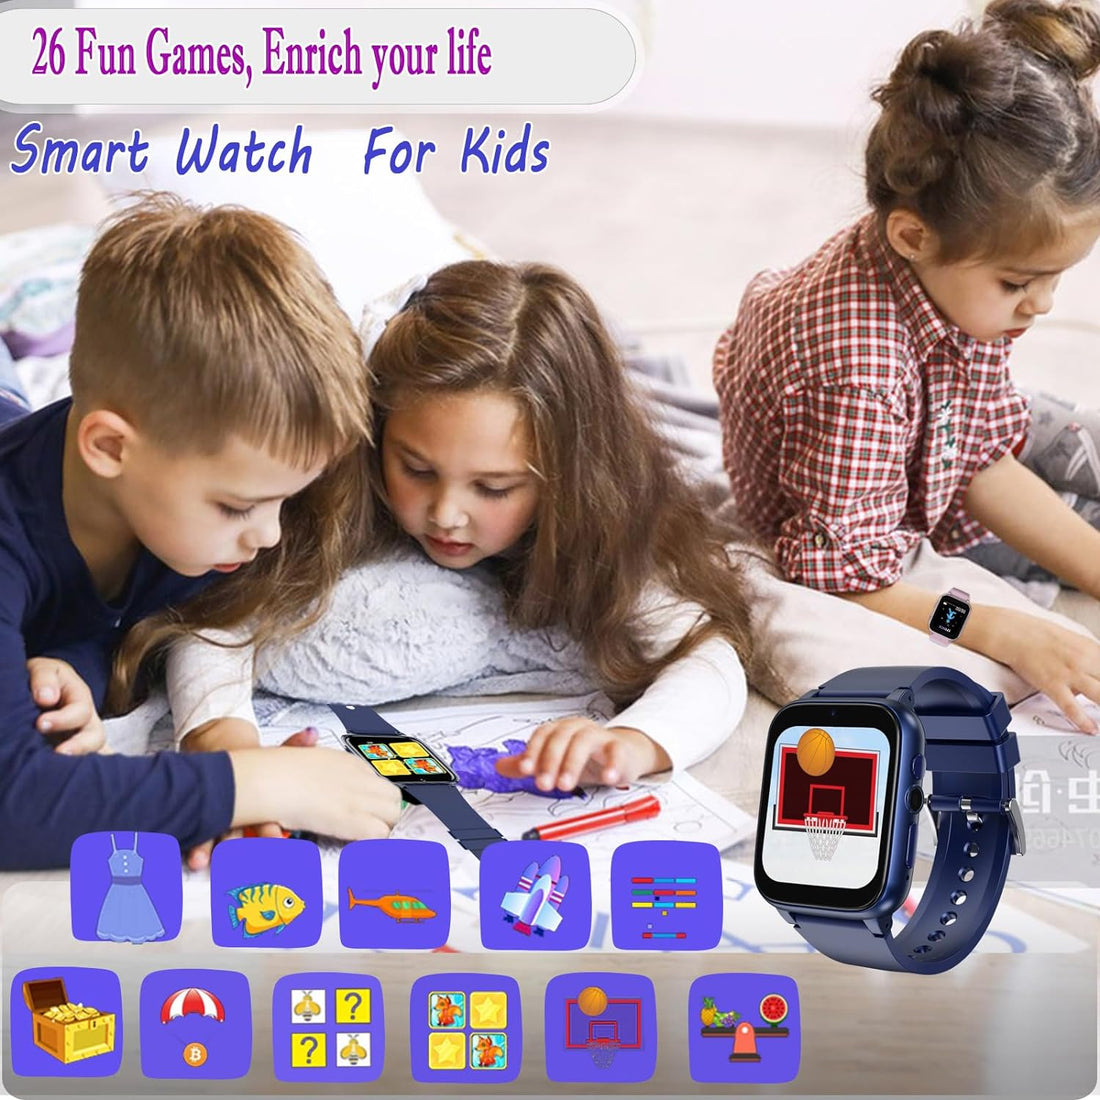 iCHOMKE Smart Watch for Kids, Girls Boys Smartwatch with 26 Games Camera Video Recorder and Player, Pedometer Calendar Flashlight, Audio Book etc., Gifts for 4-12 Years Children (Blue)